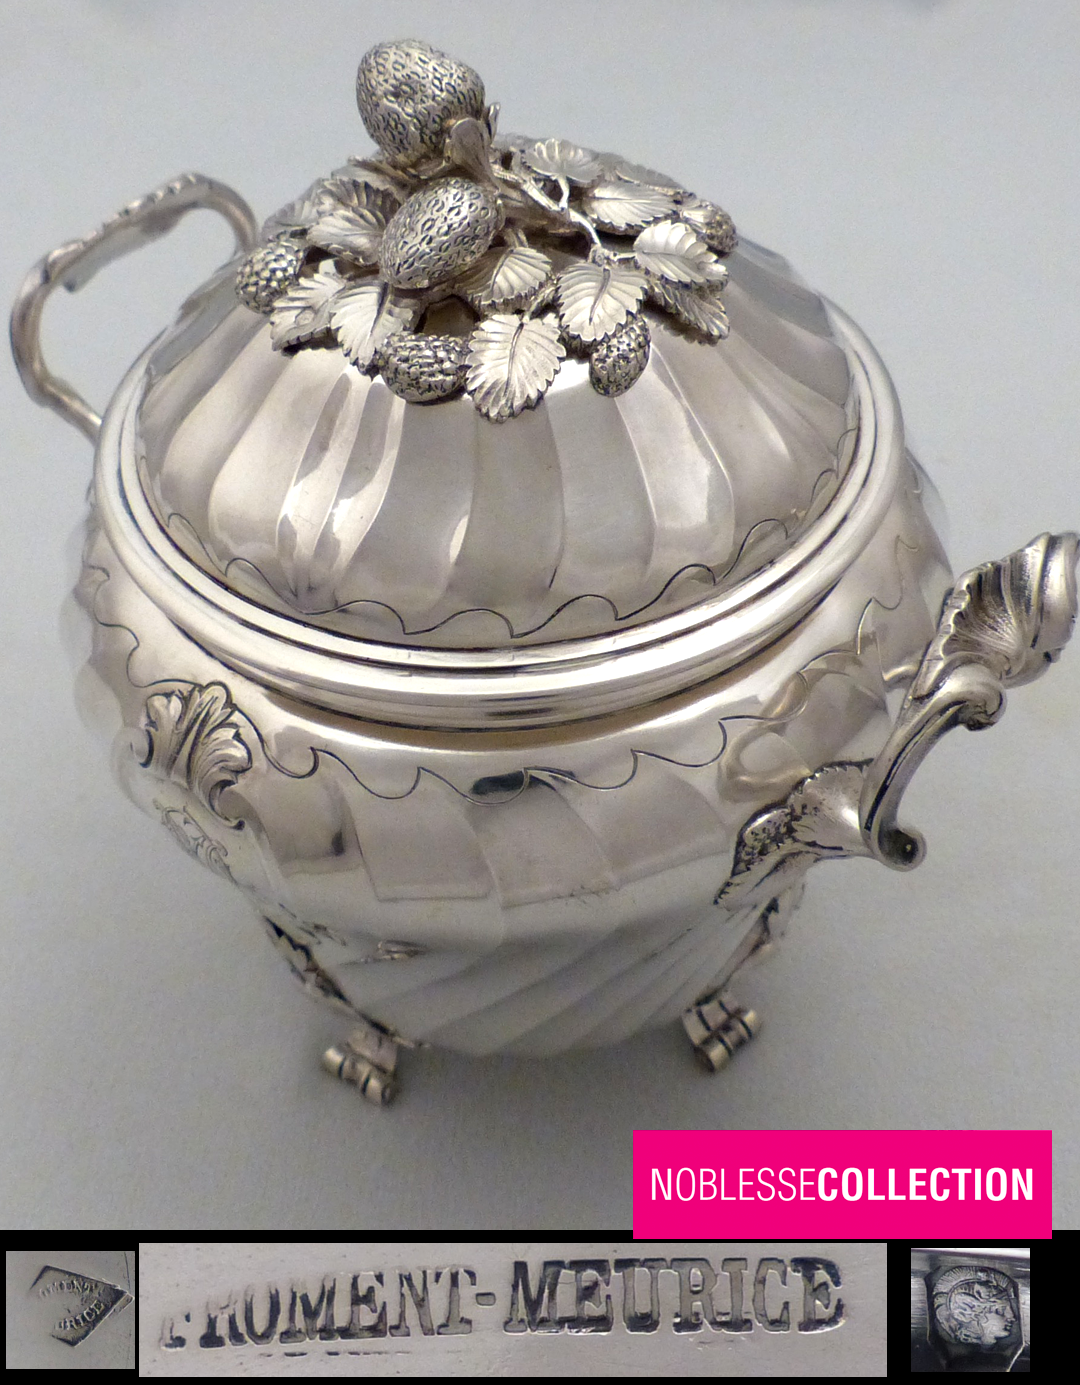 Froment-meurice Rare Antique 1840s French Sterling Silver & Vermeil Sugar Bowl